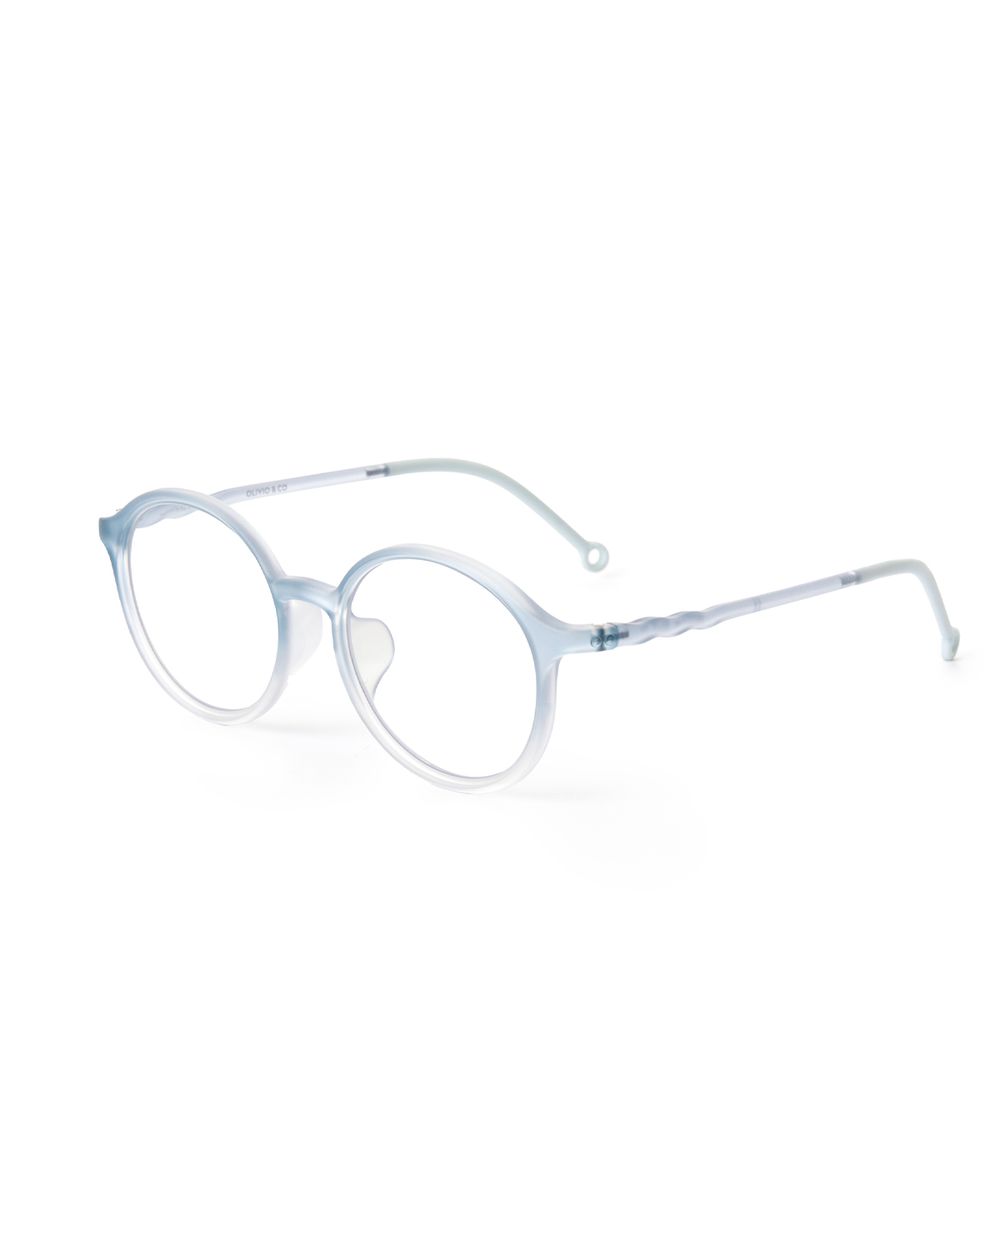 Adult Oval Screen Glasses Tranquil Blue